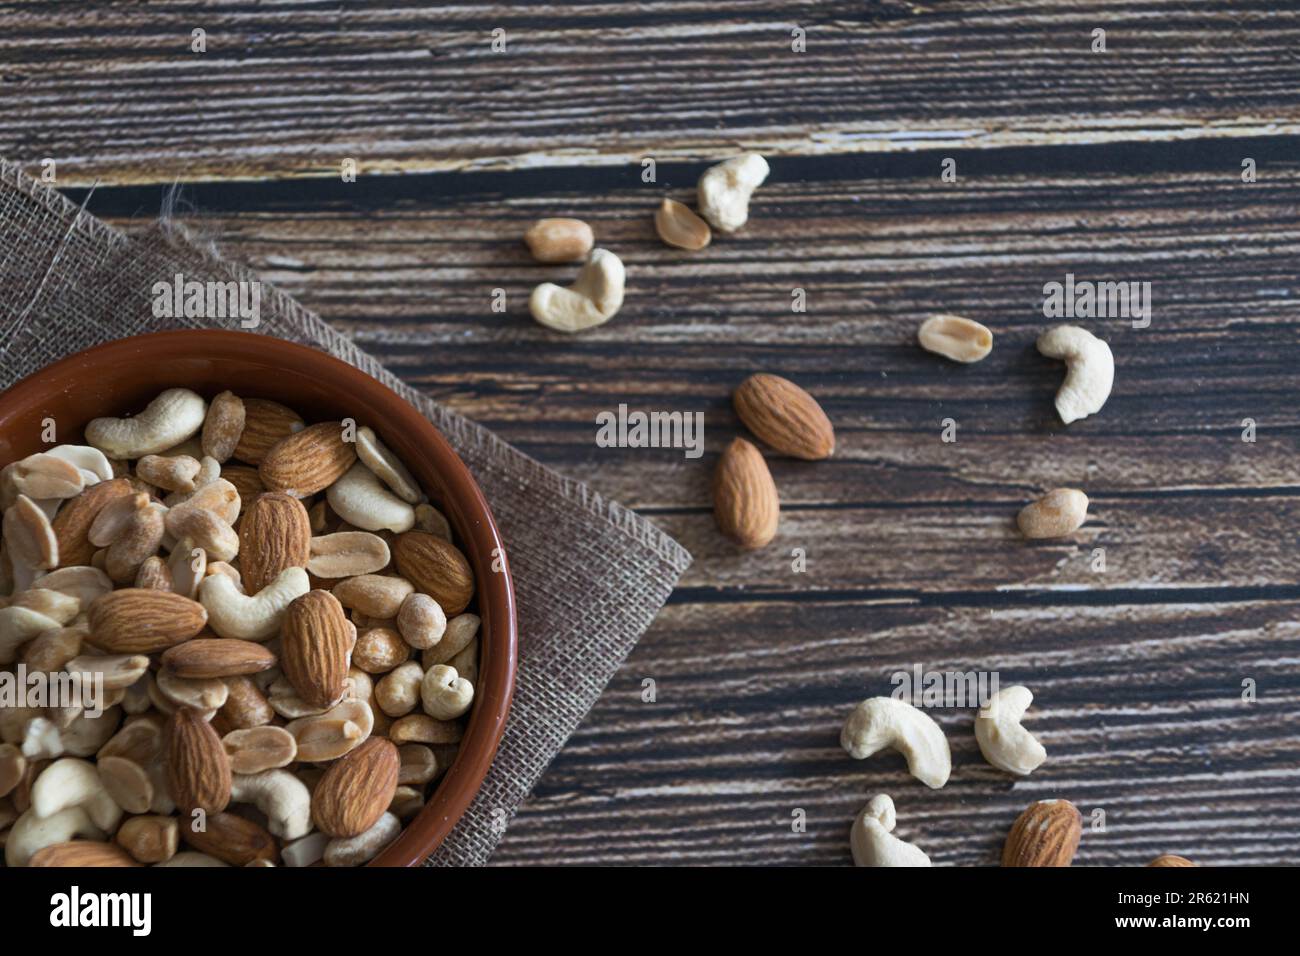 A shallow bowl filled with assorted nuts is placed on a wooden table Stock Photo